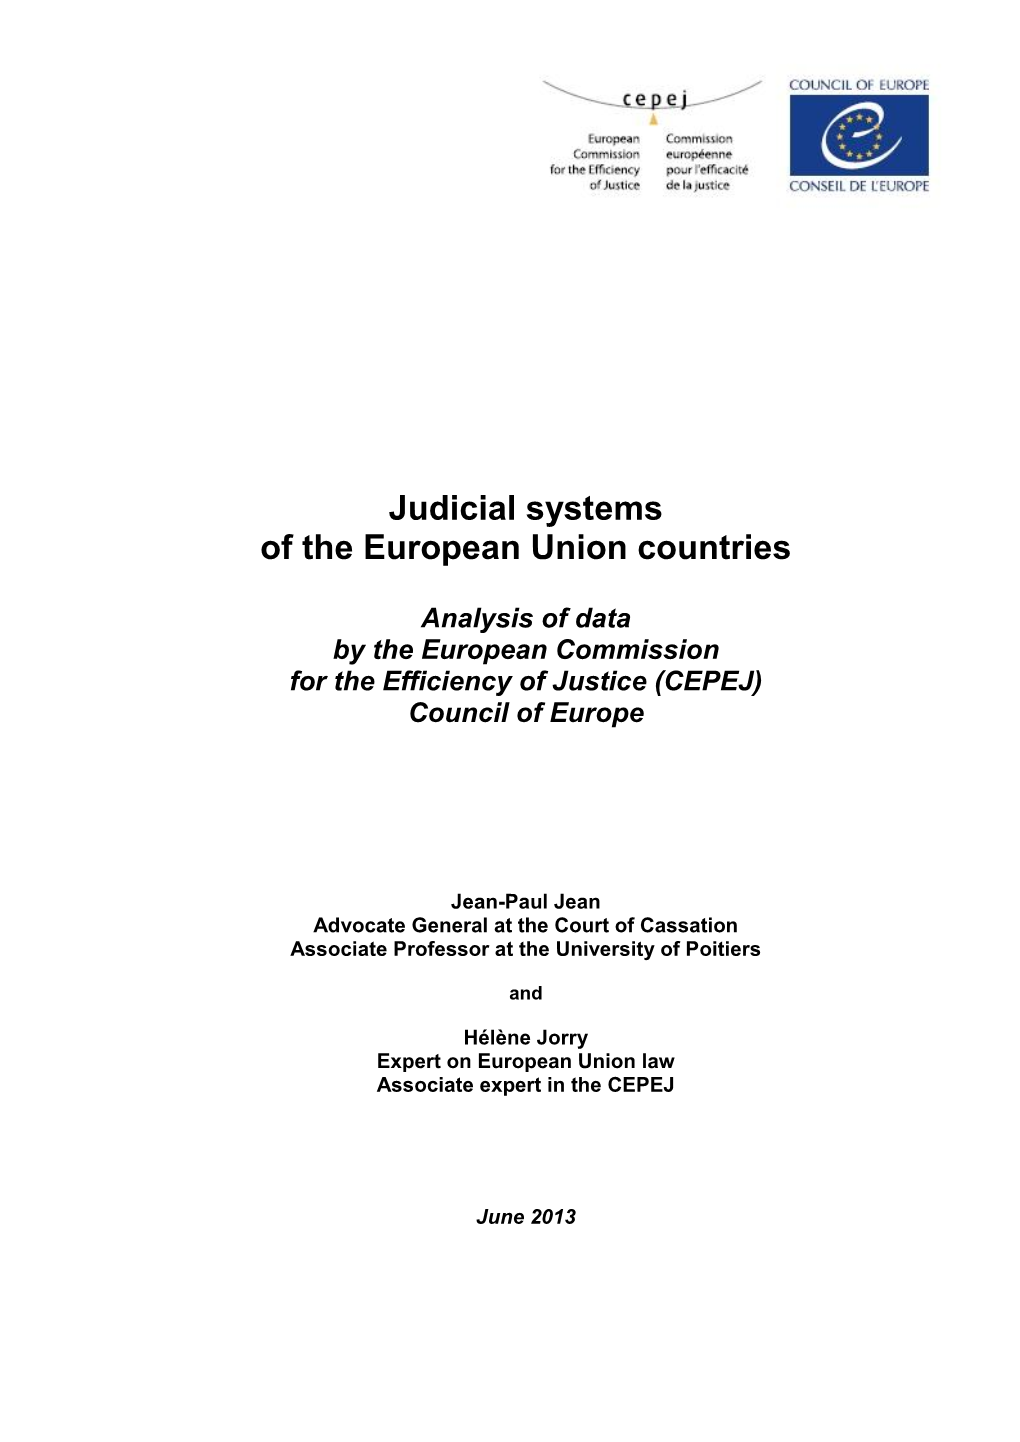 Judicial Systems of the European Union Countries